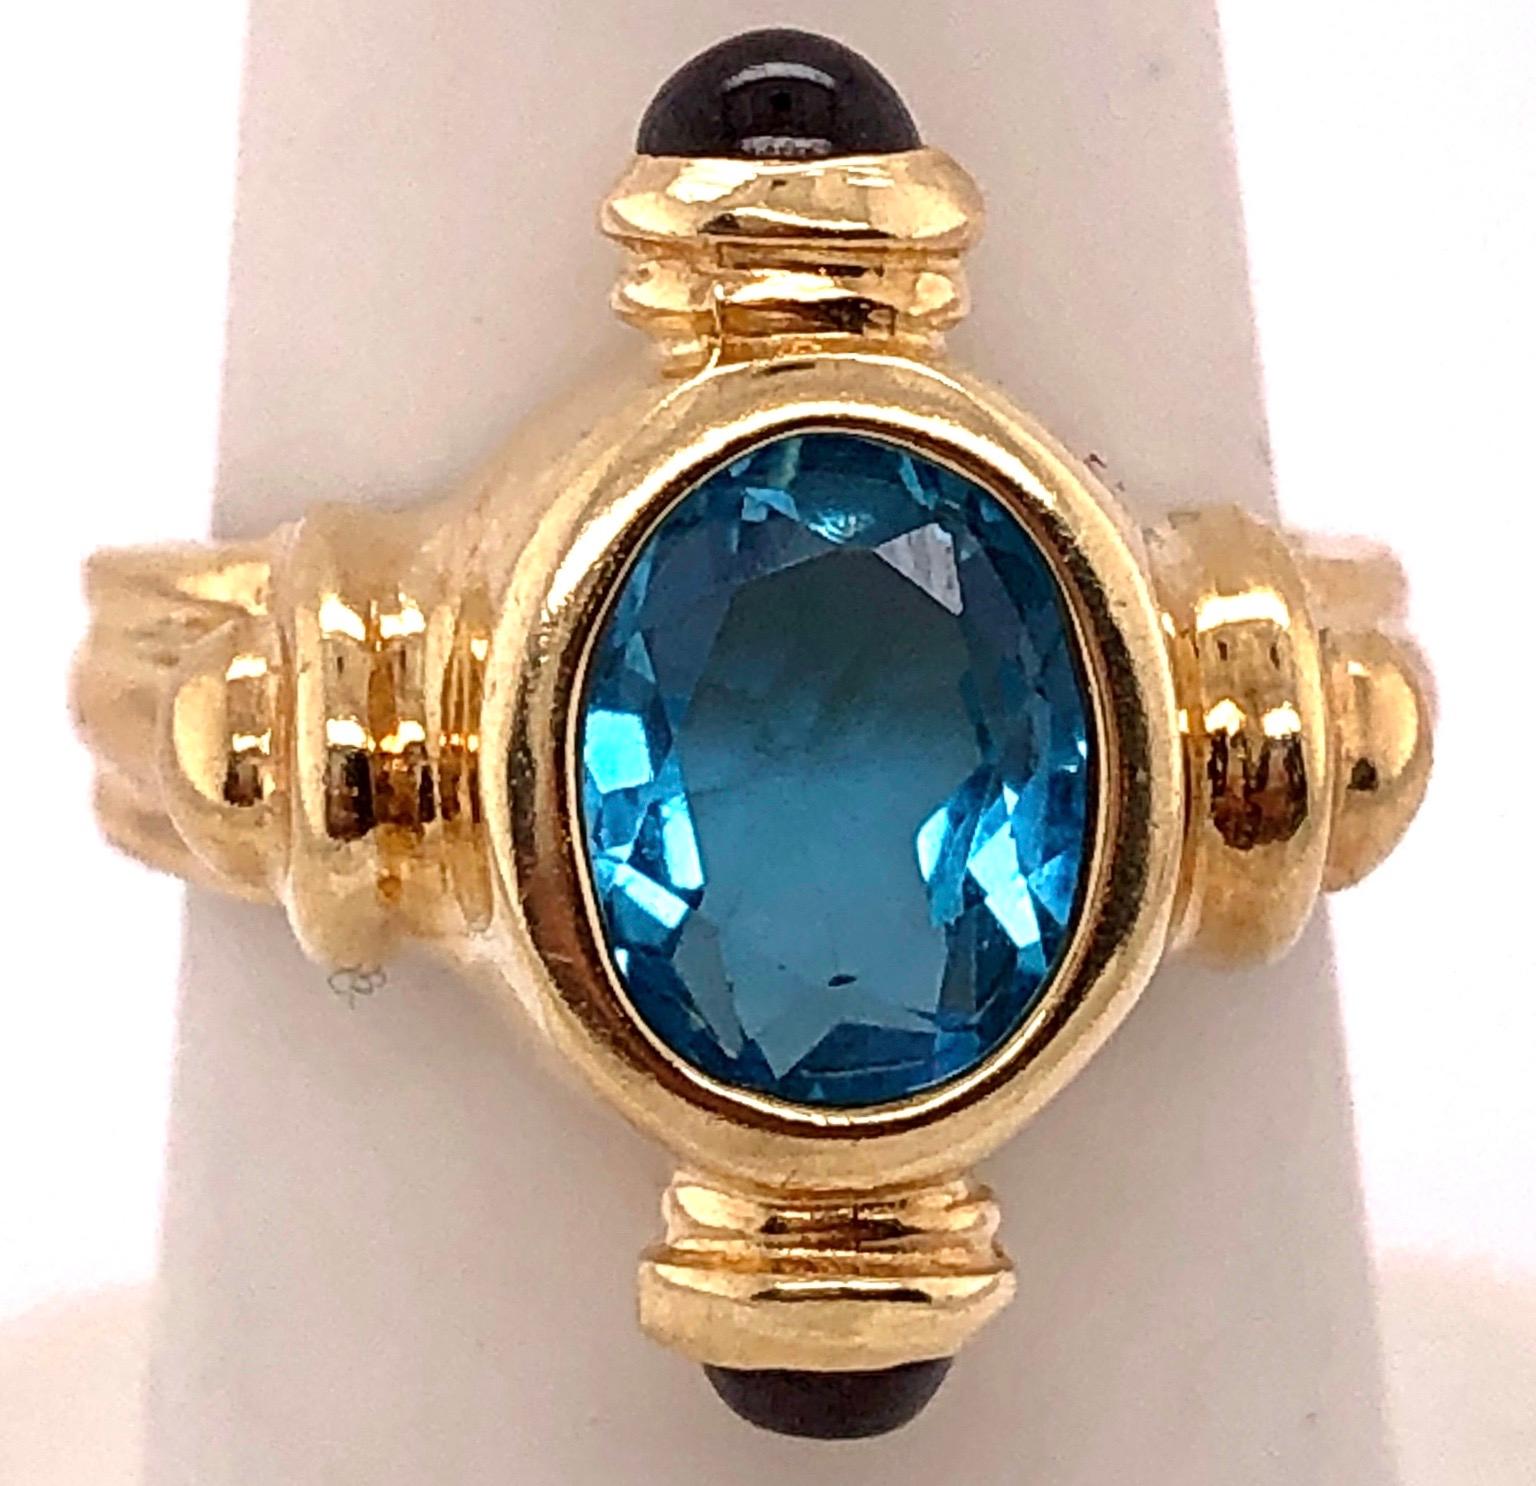 14 Karat Yellow Gold Free Form Ring with Stones.
Size 6
7 grams total weight.